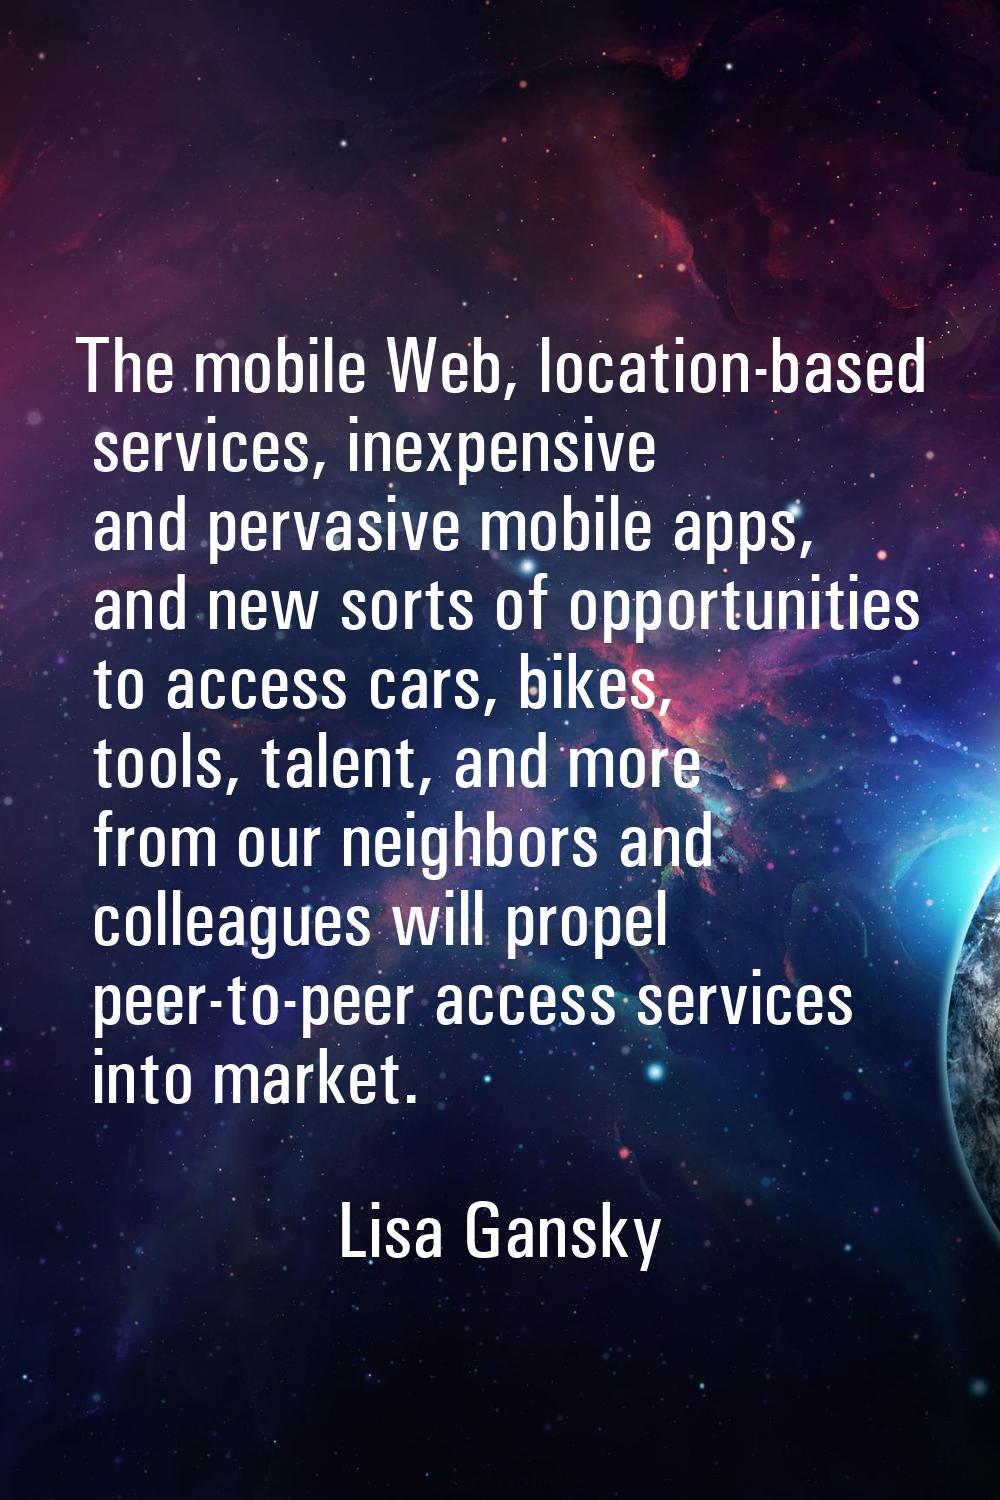 The mobile Web, location-based services, inexpensive and pervasive mobile apps, and new sorts of op